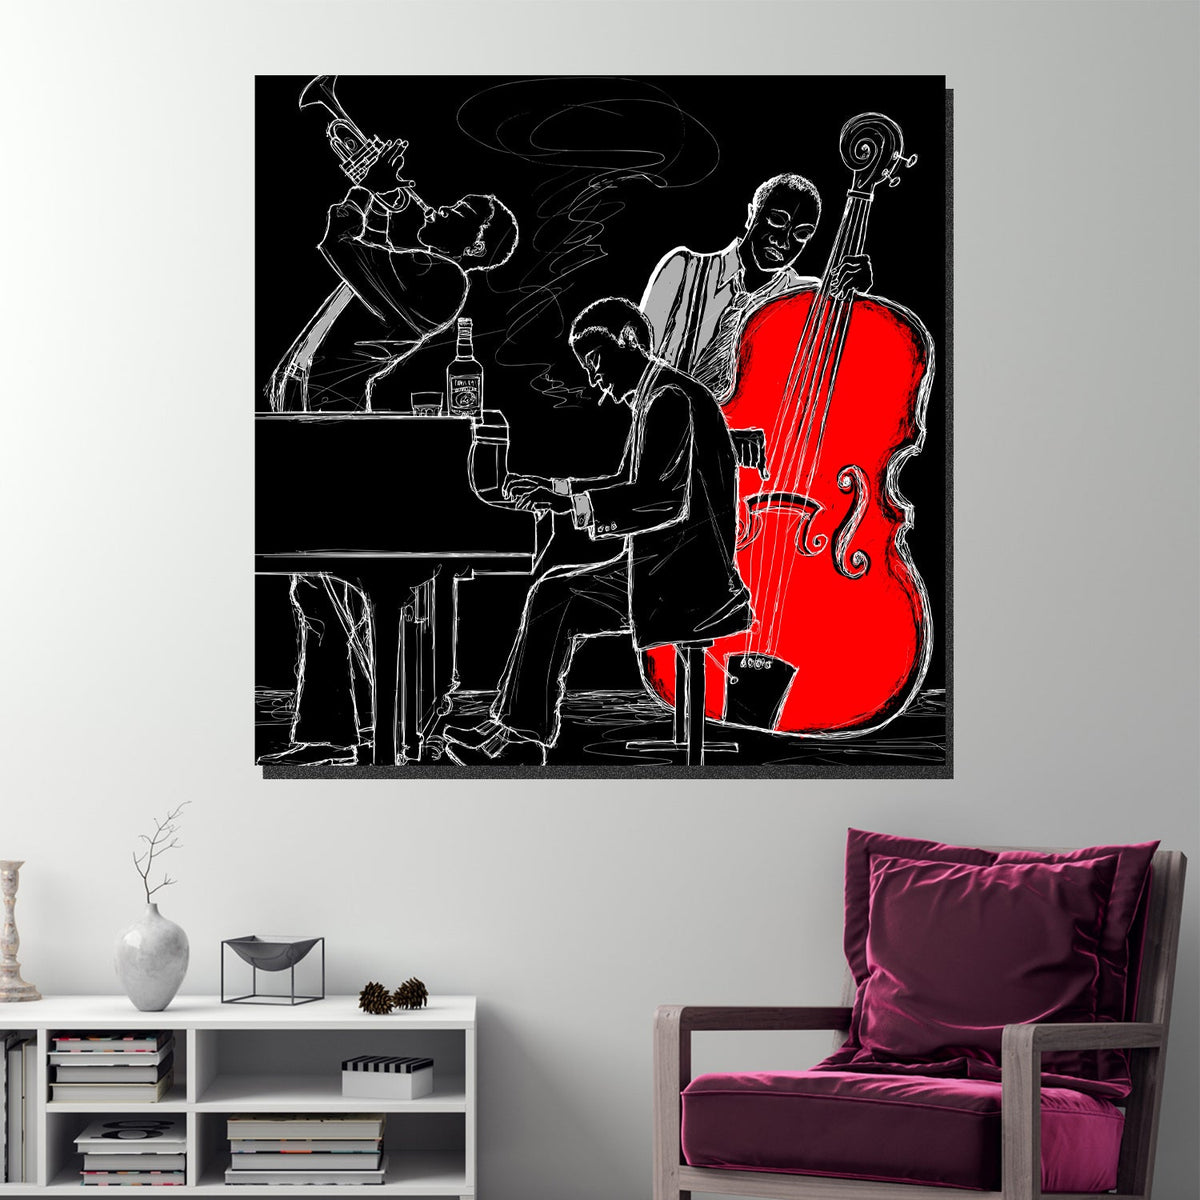 https://cdn.shopify.com/s/files/1/0387/9986/8044/products/JazzMusicBandCanvasArtprintStretched-4.jpg